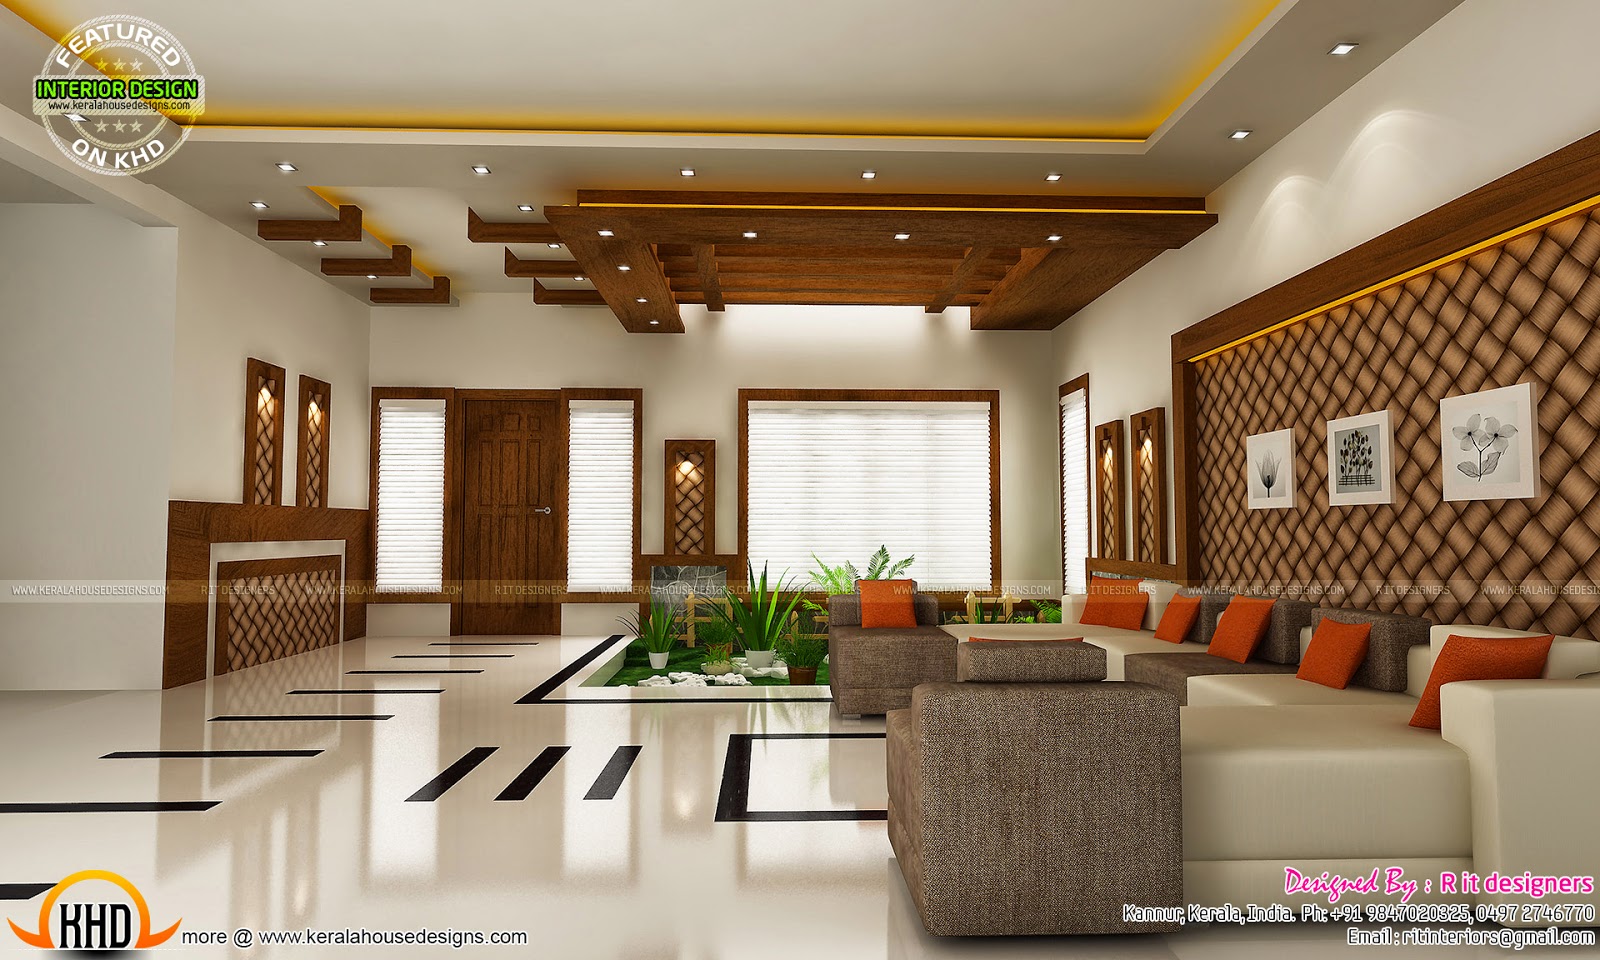 Modern and unique dining, kitchen interior - Kerala home ...